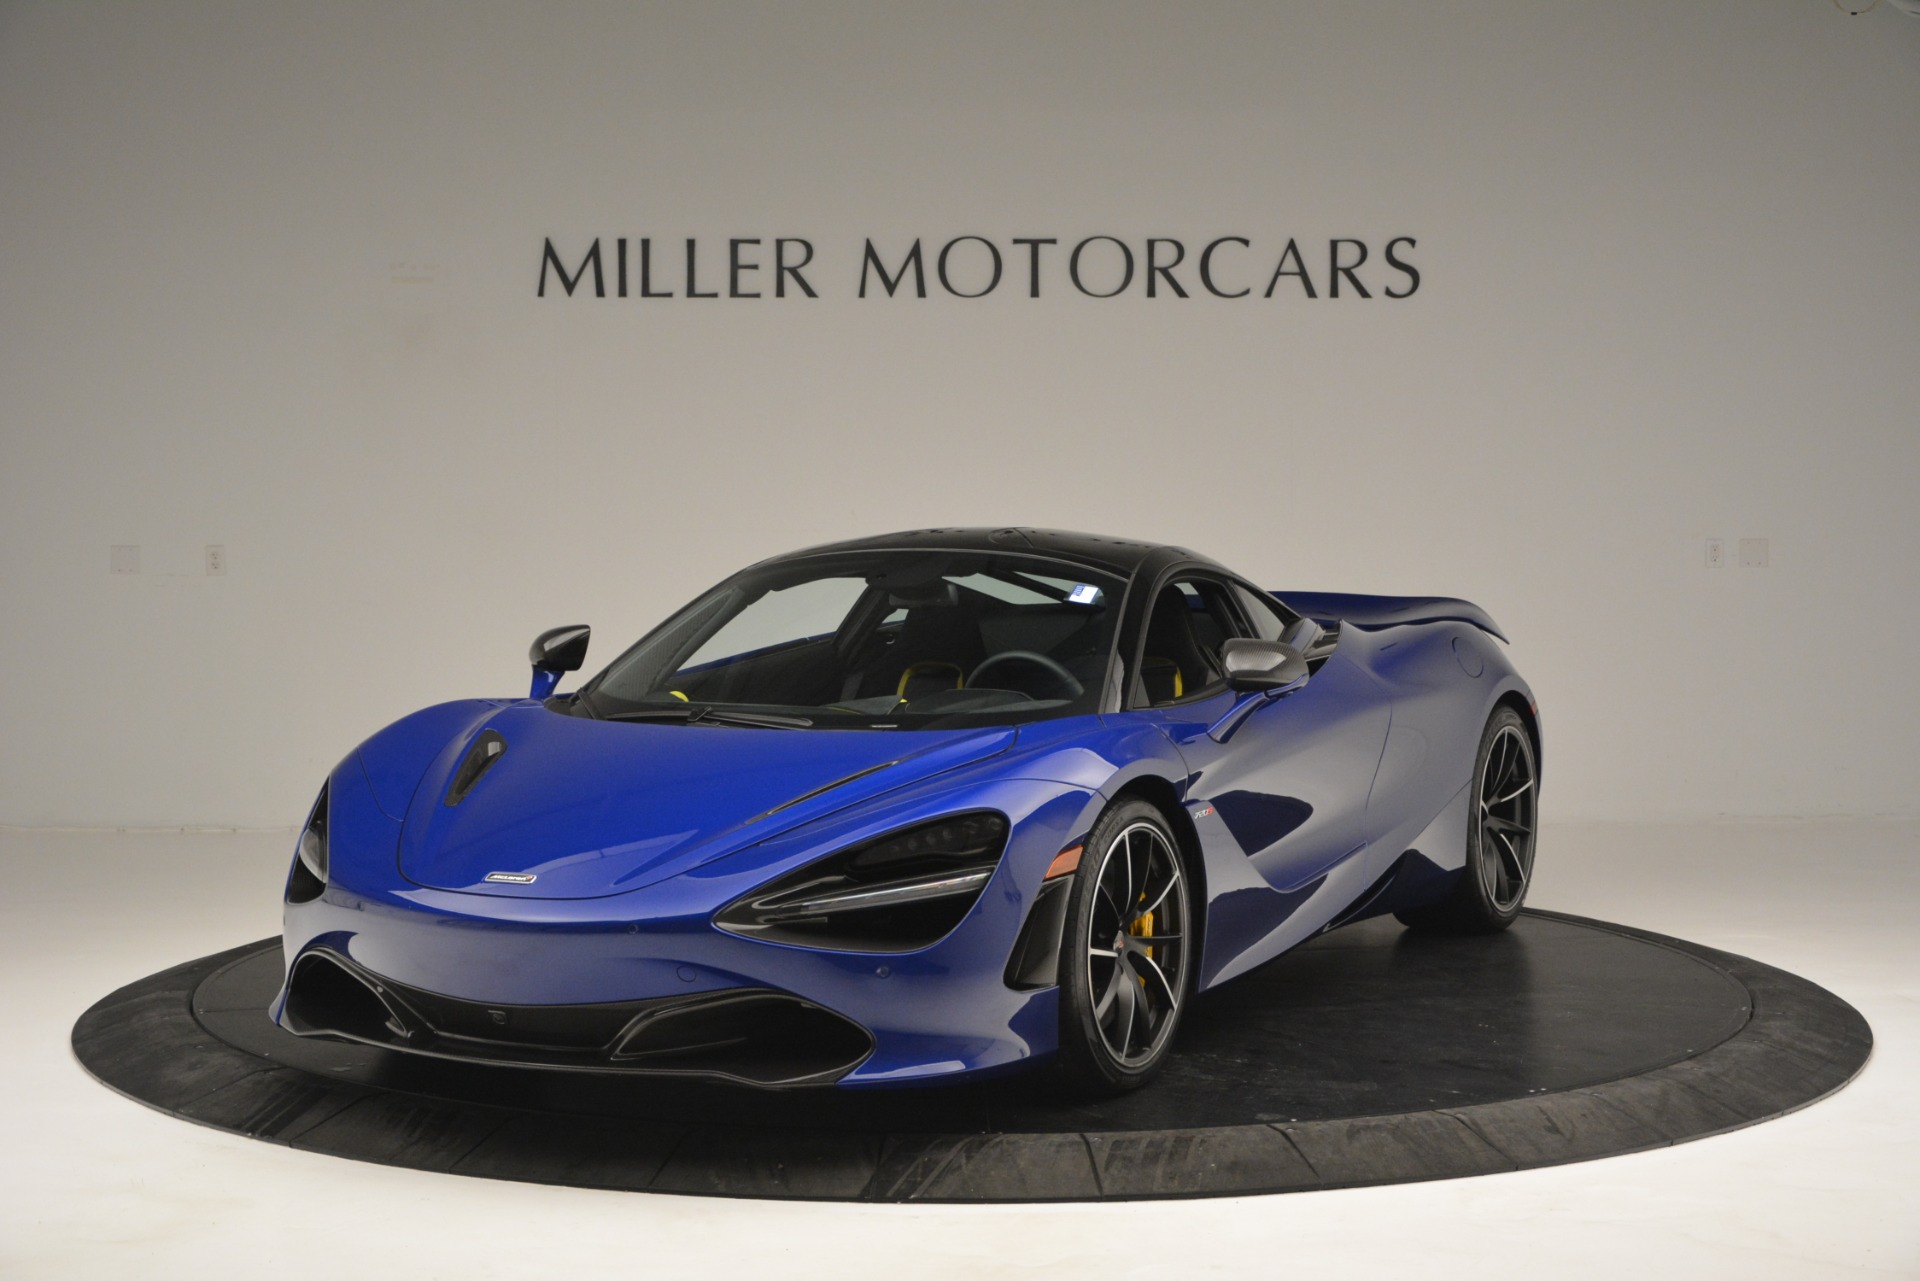 Used 2018 McLaren 720S Performance for sale Sold at McLaren Greenwich in Greenwich CT 06830 1